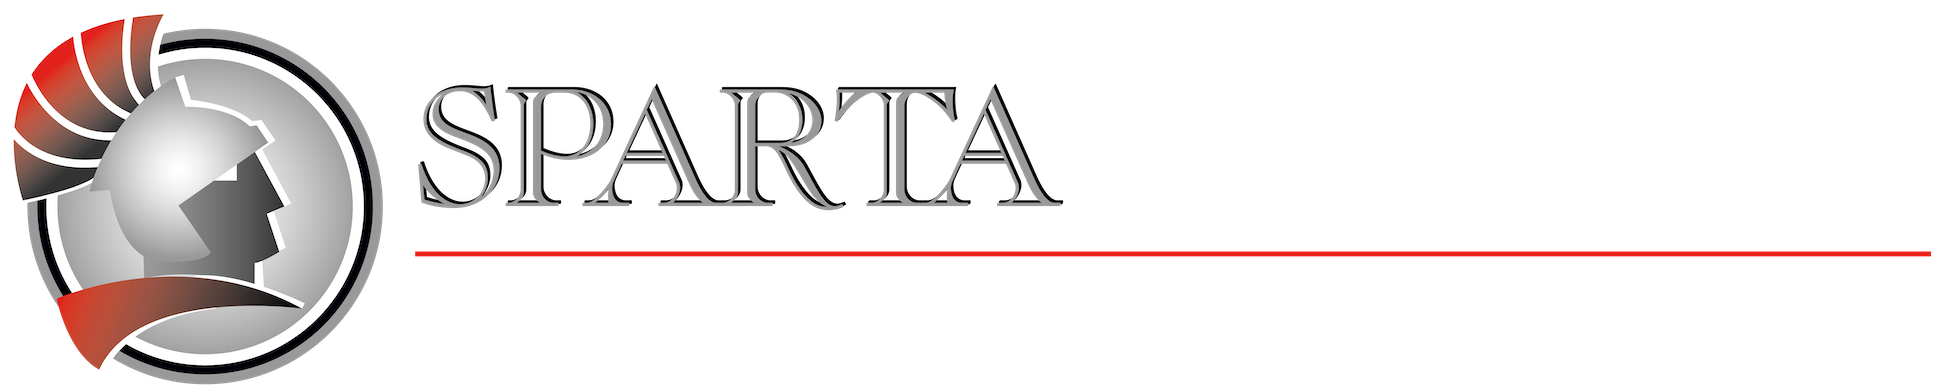 High Value Operations in Government & Non-Private Sector Finance, Mobile Apps, Wellness Product Divisions with a Very Low Stock Float: Sparta Commercial Services, Inc. (Stock Symbol: SRCO)